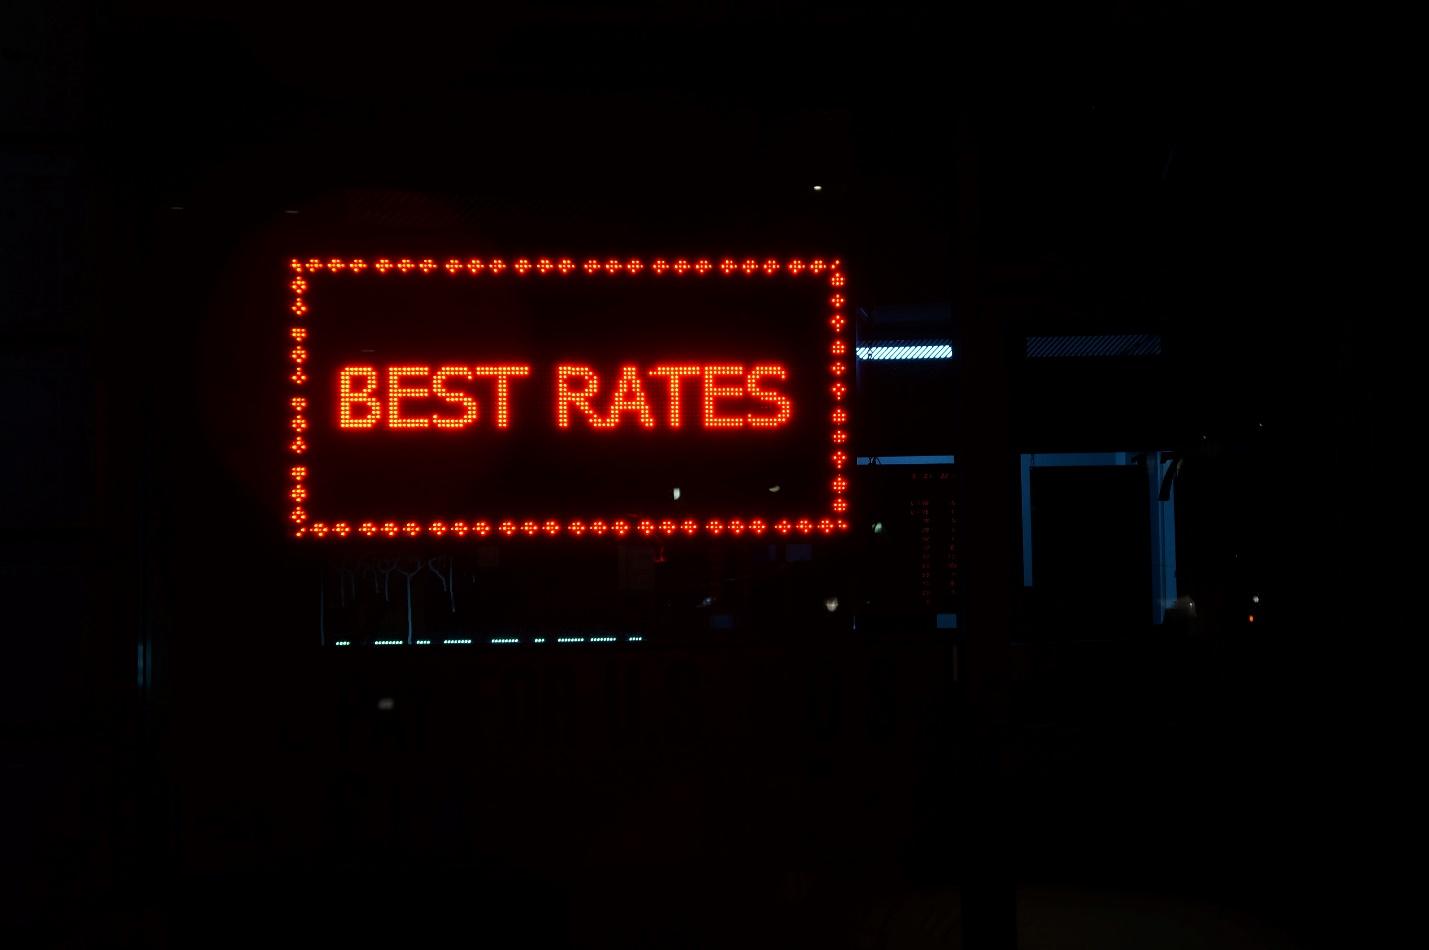 A lighted sign in the dark

Description automatically generated with low confidence